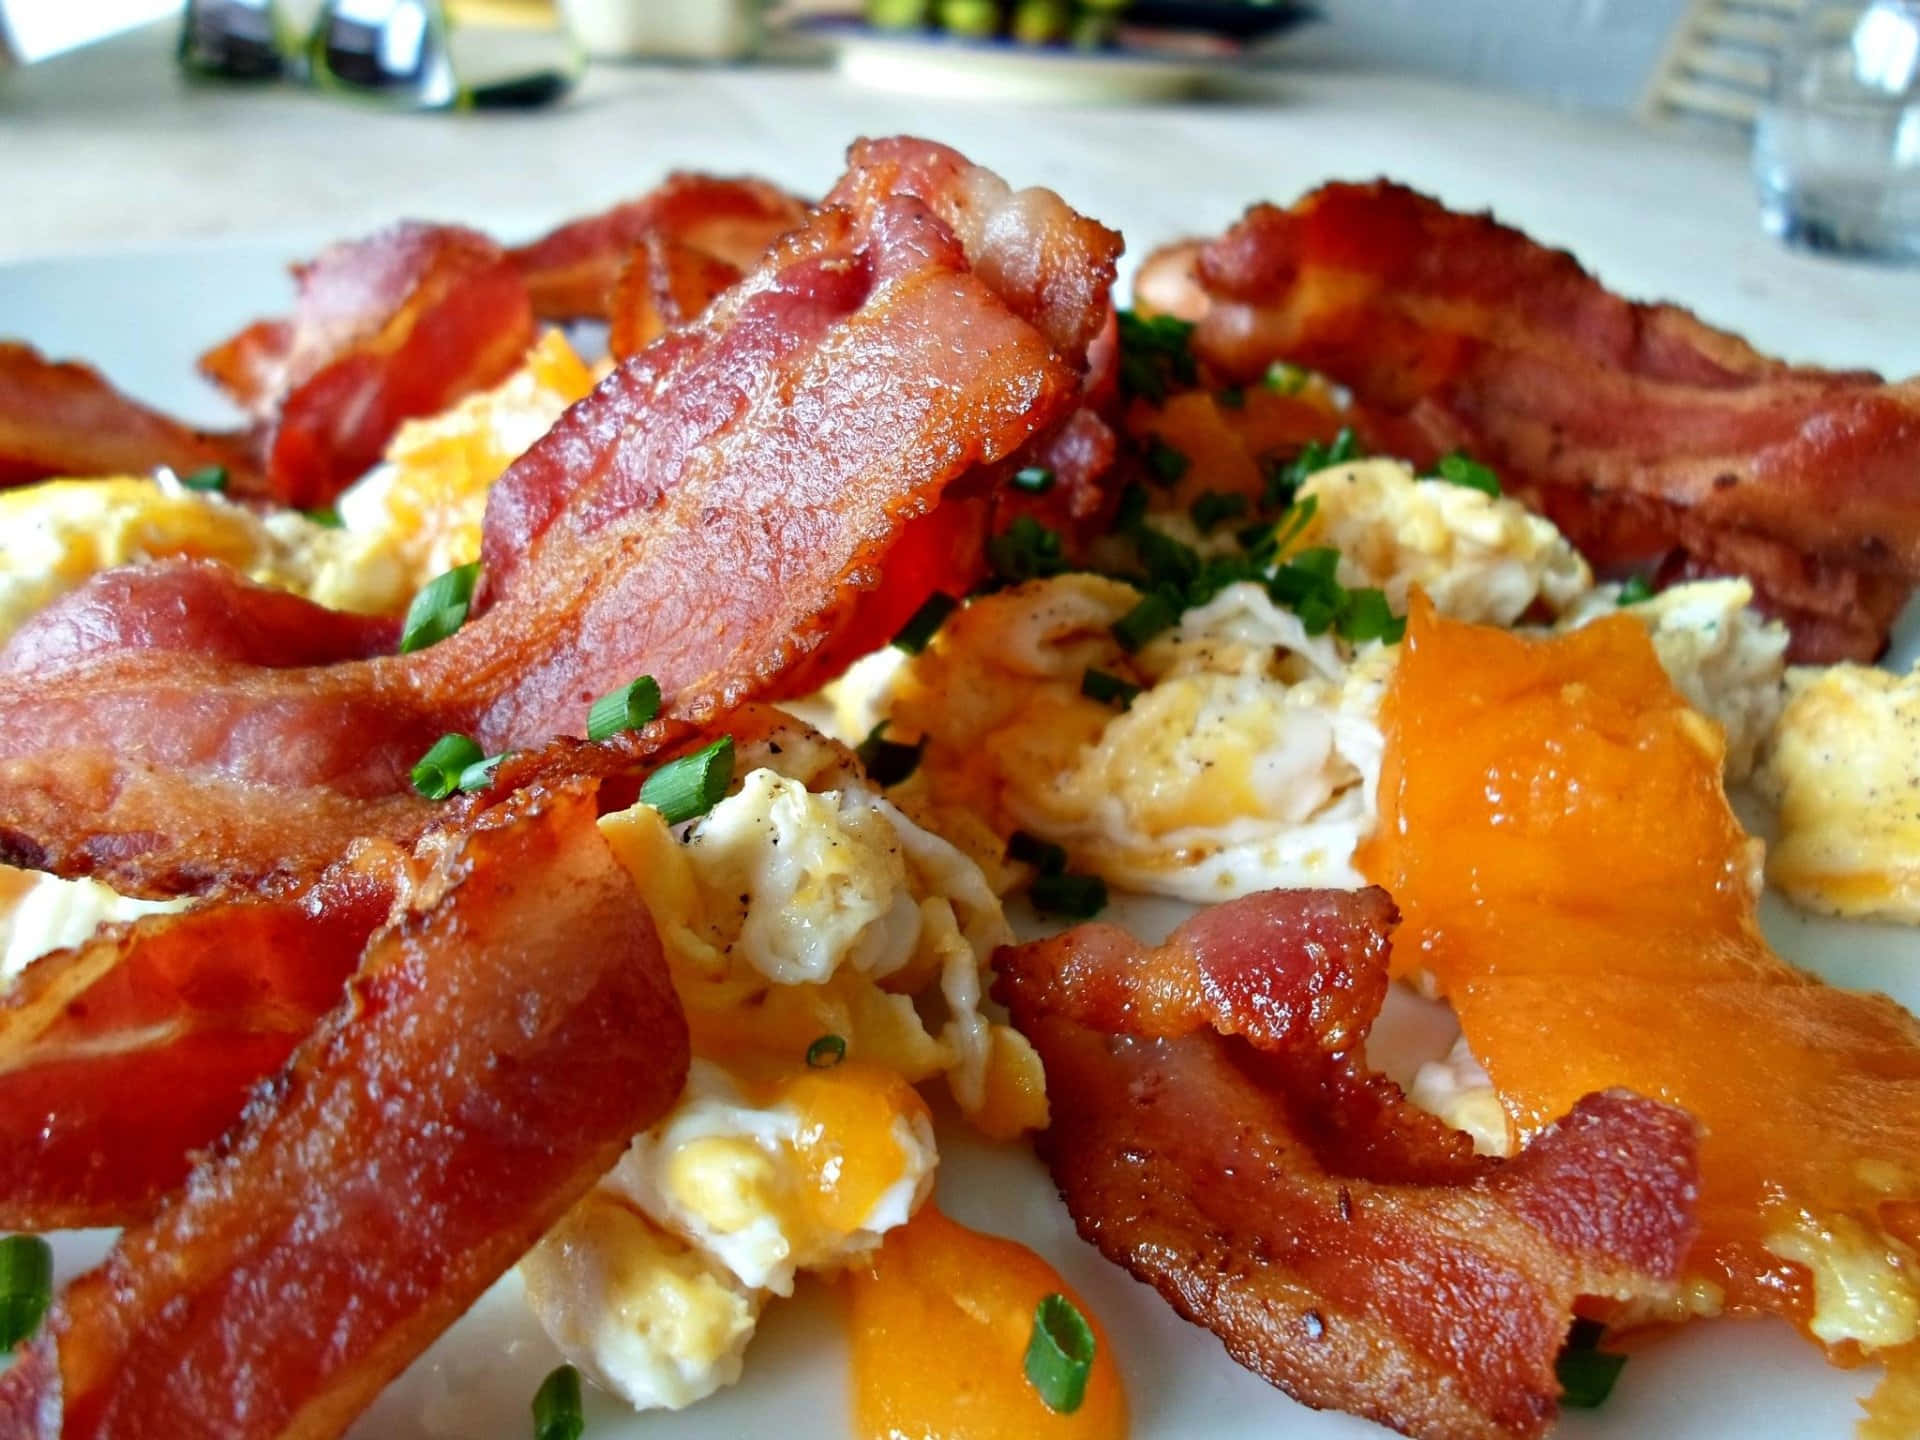 A Plate Of Bacon, Eggs And Oranges